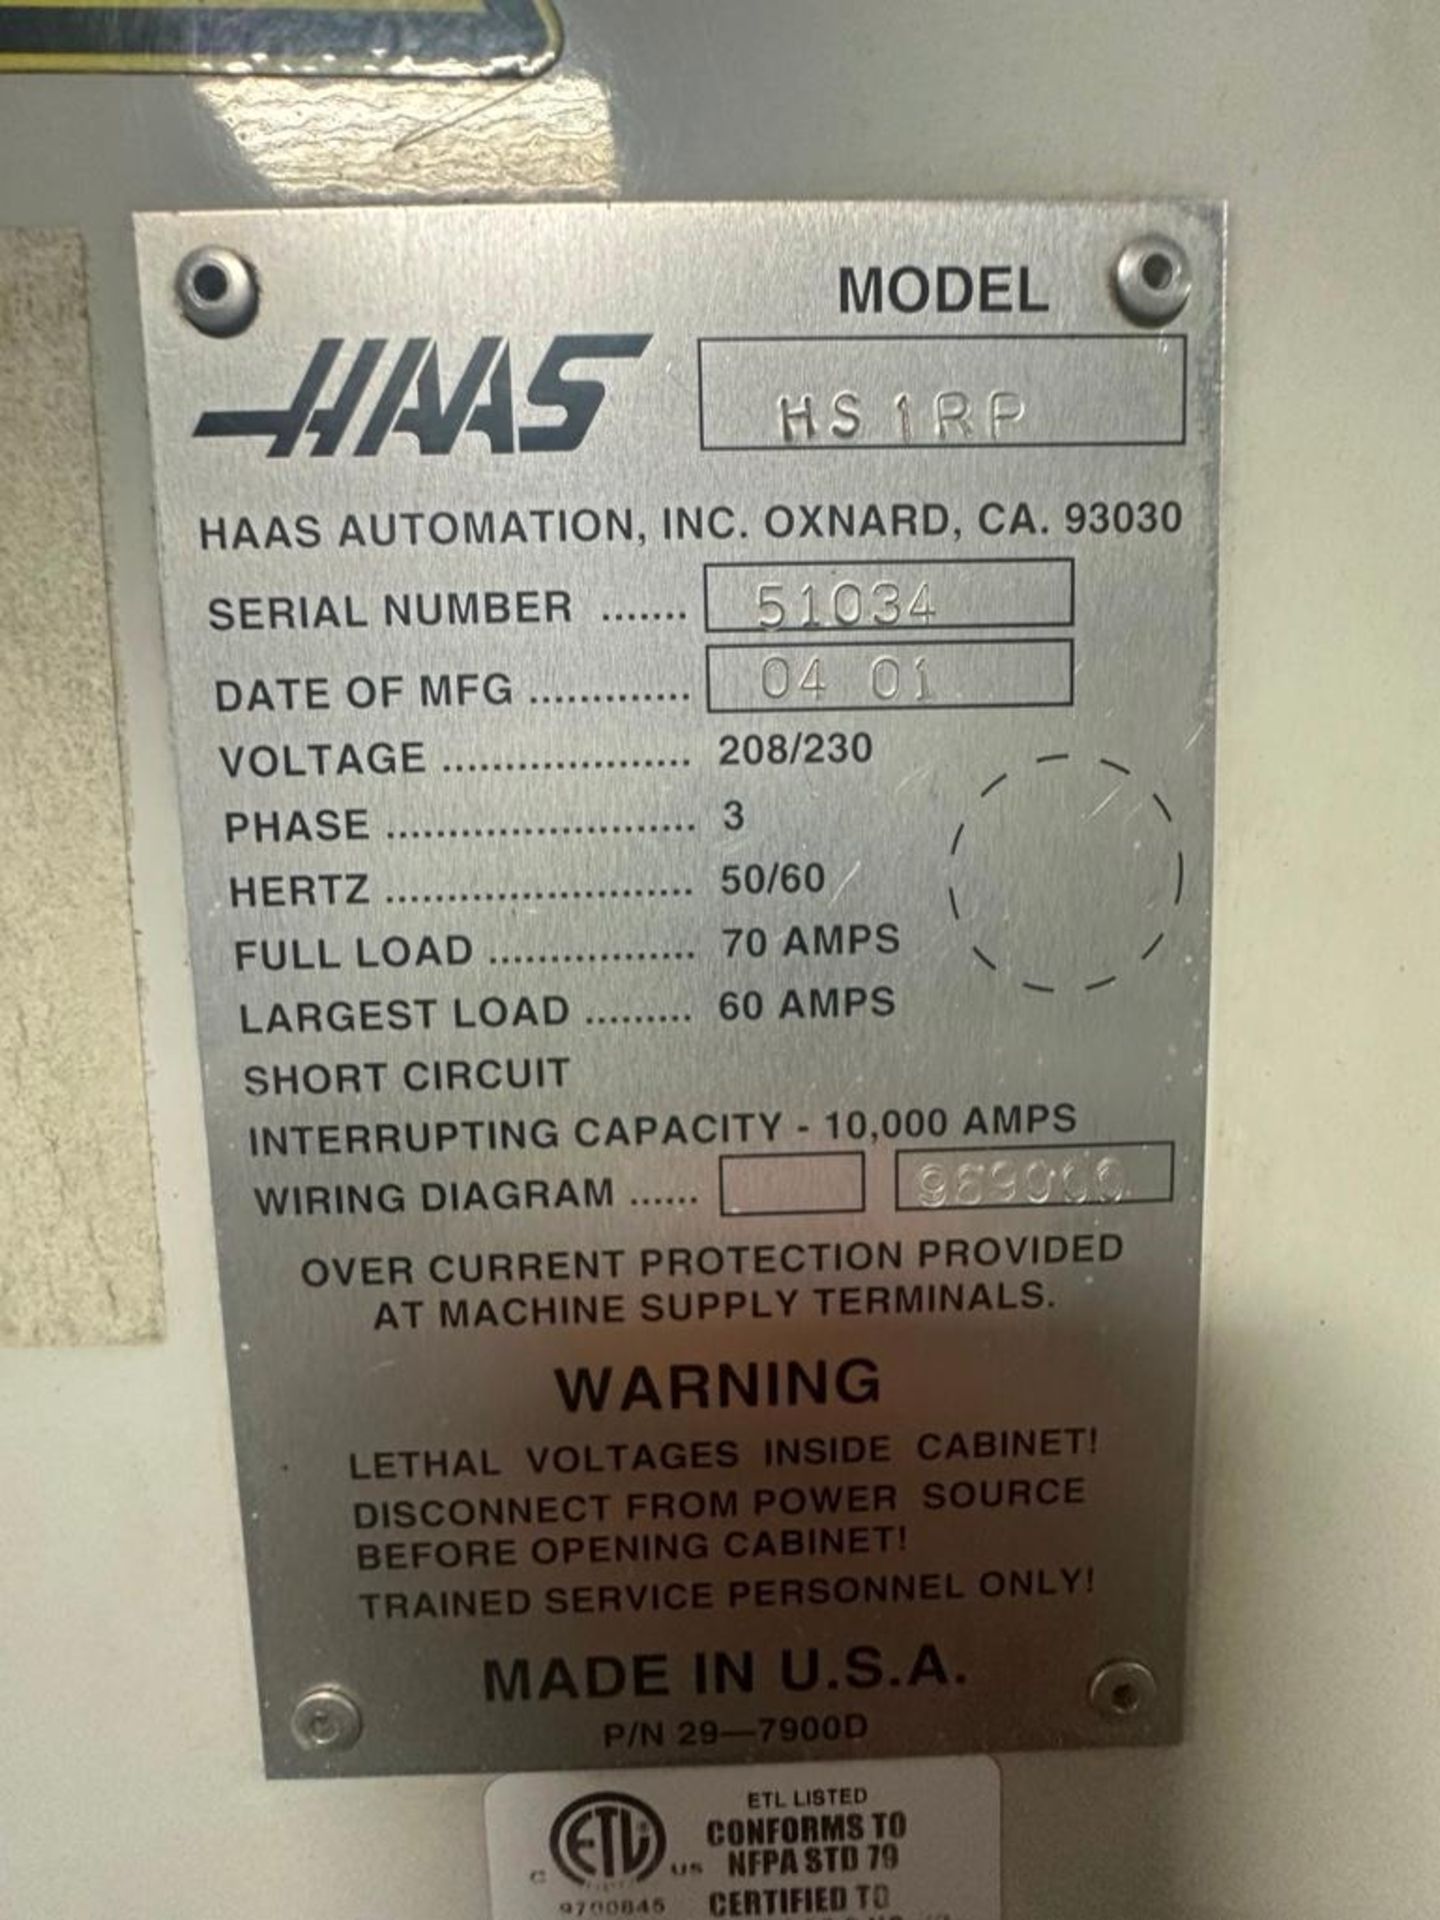 Haas HS1RP 4-Axis Horizontal Machining Center, 24" x 20" x 22" Trvls., New 2001 - Image 10 of 10